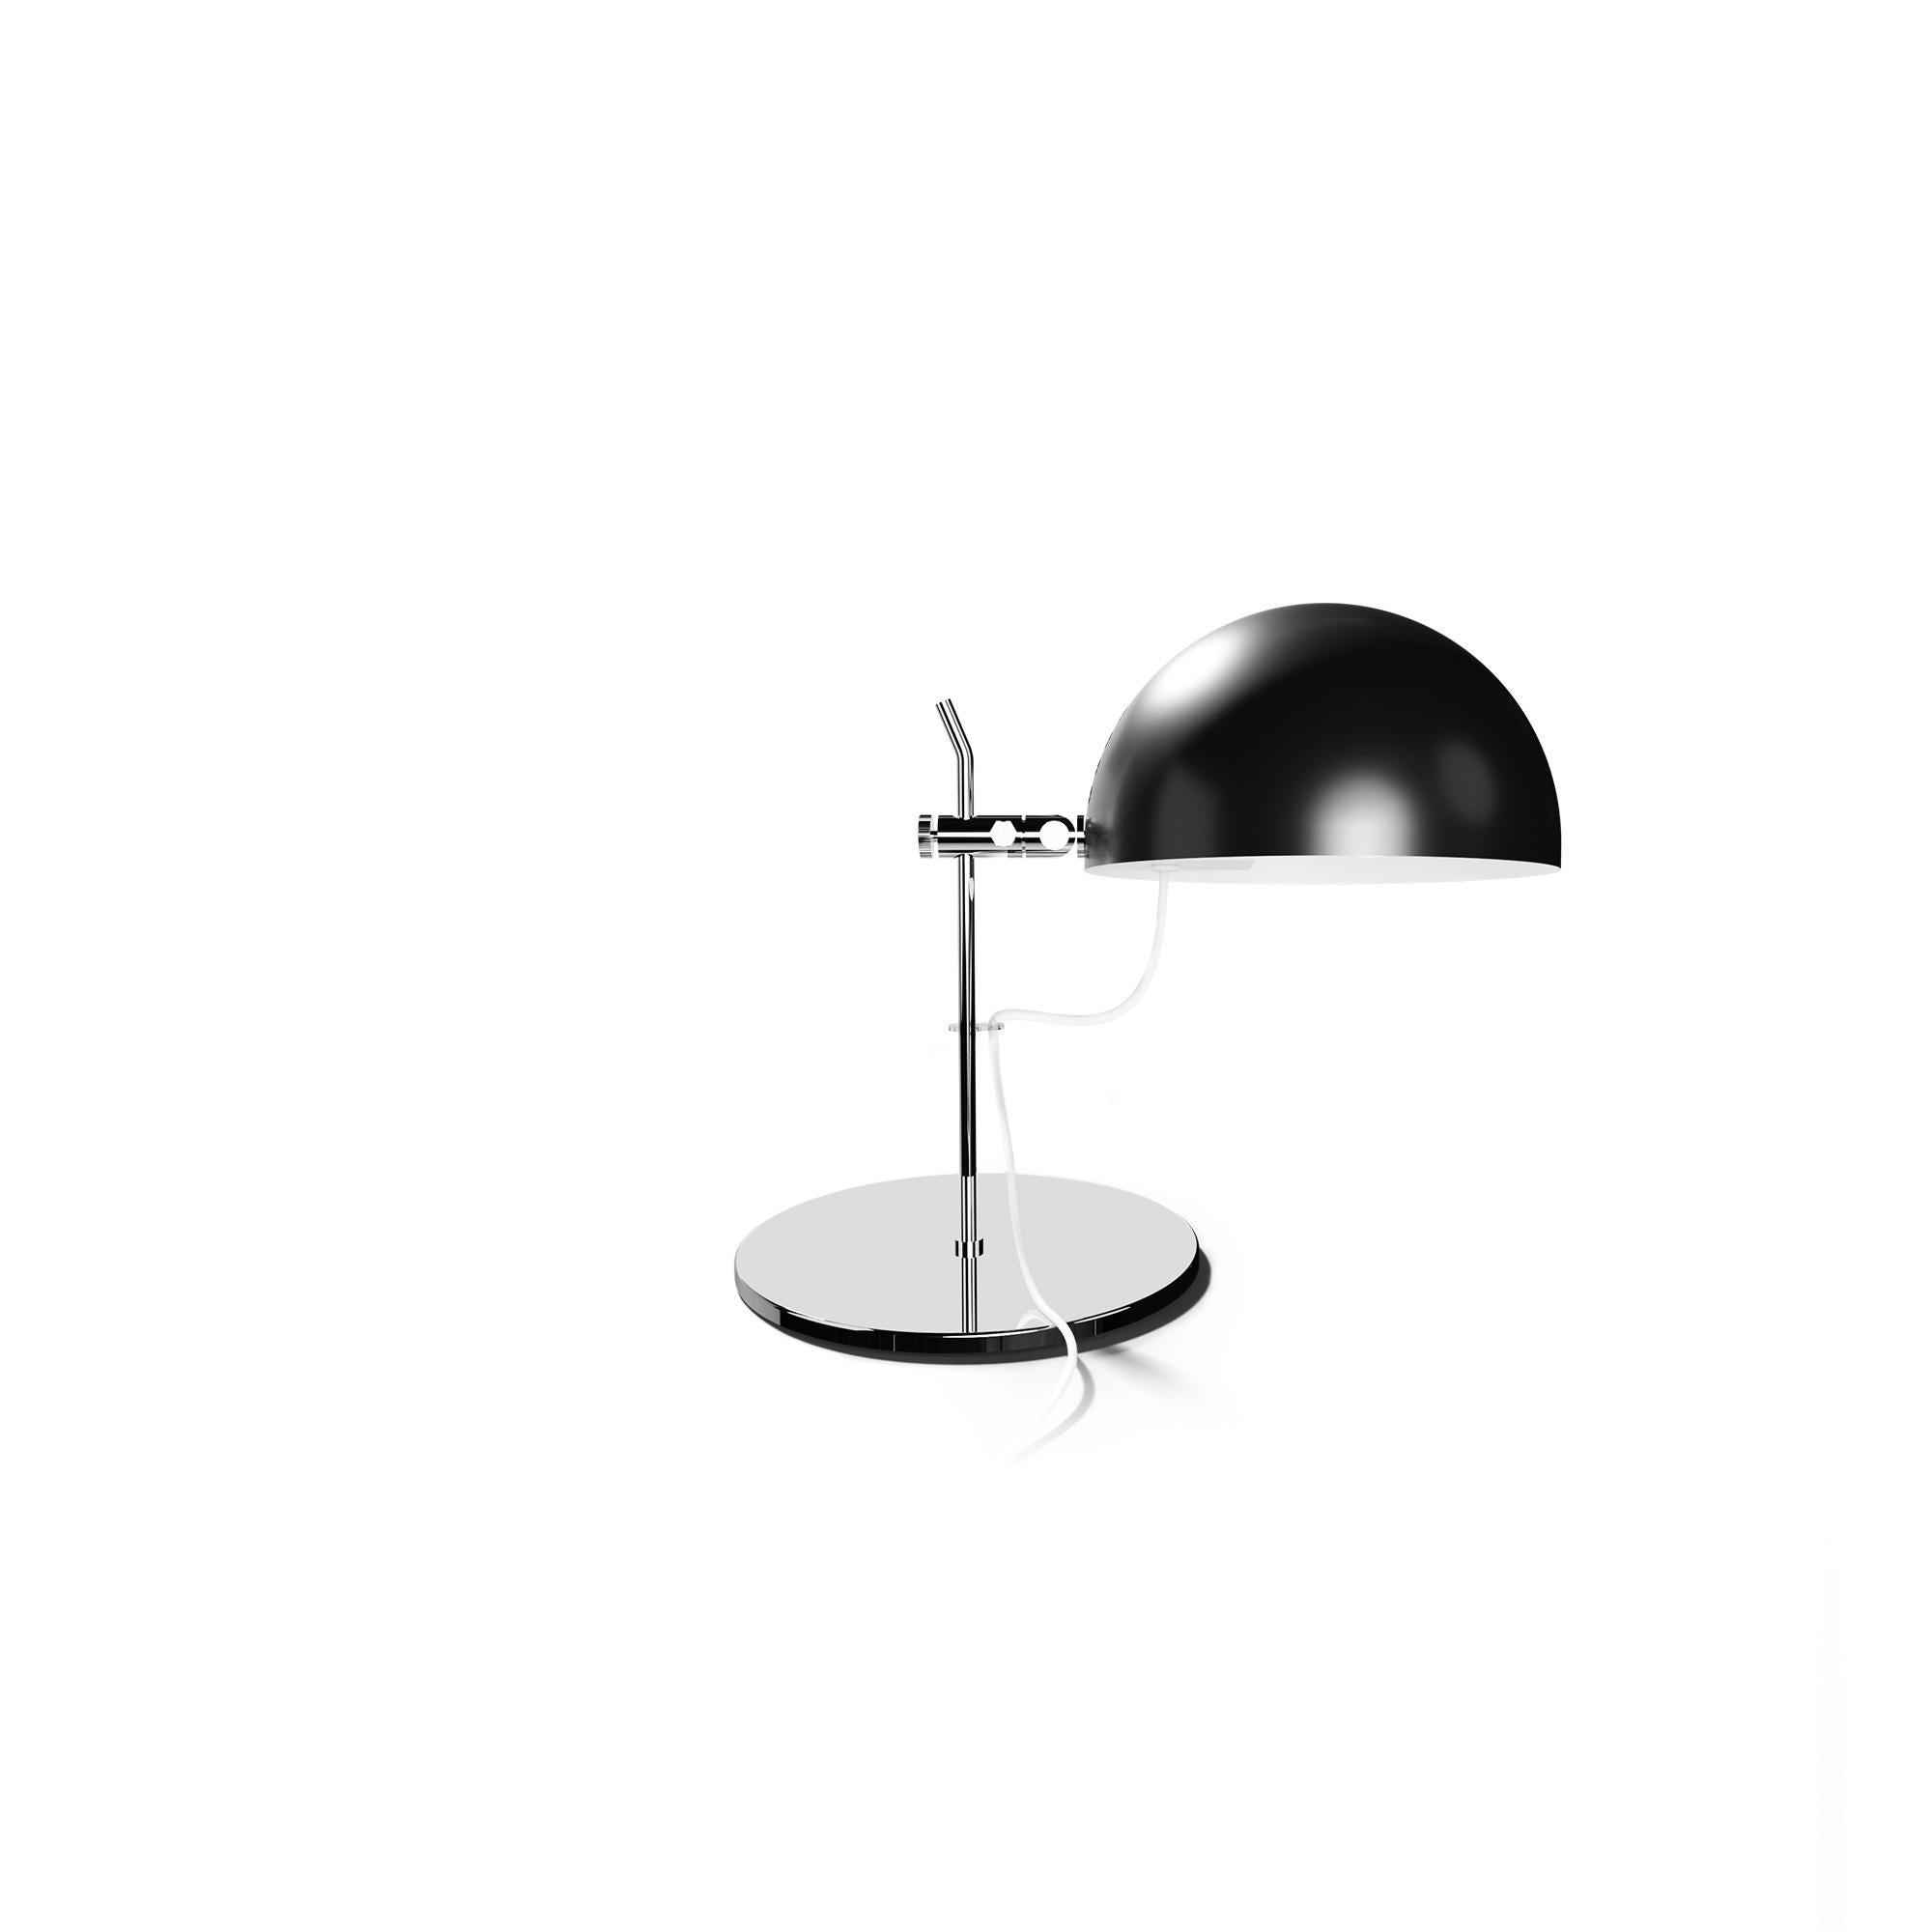 Alain Richard 'A23' Metal and Marble Floor Lamp for Disderot in Green For Sale 6